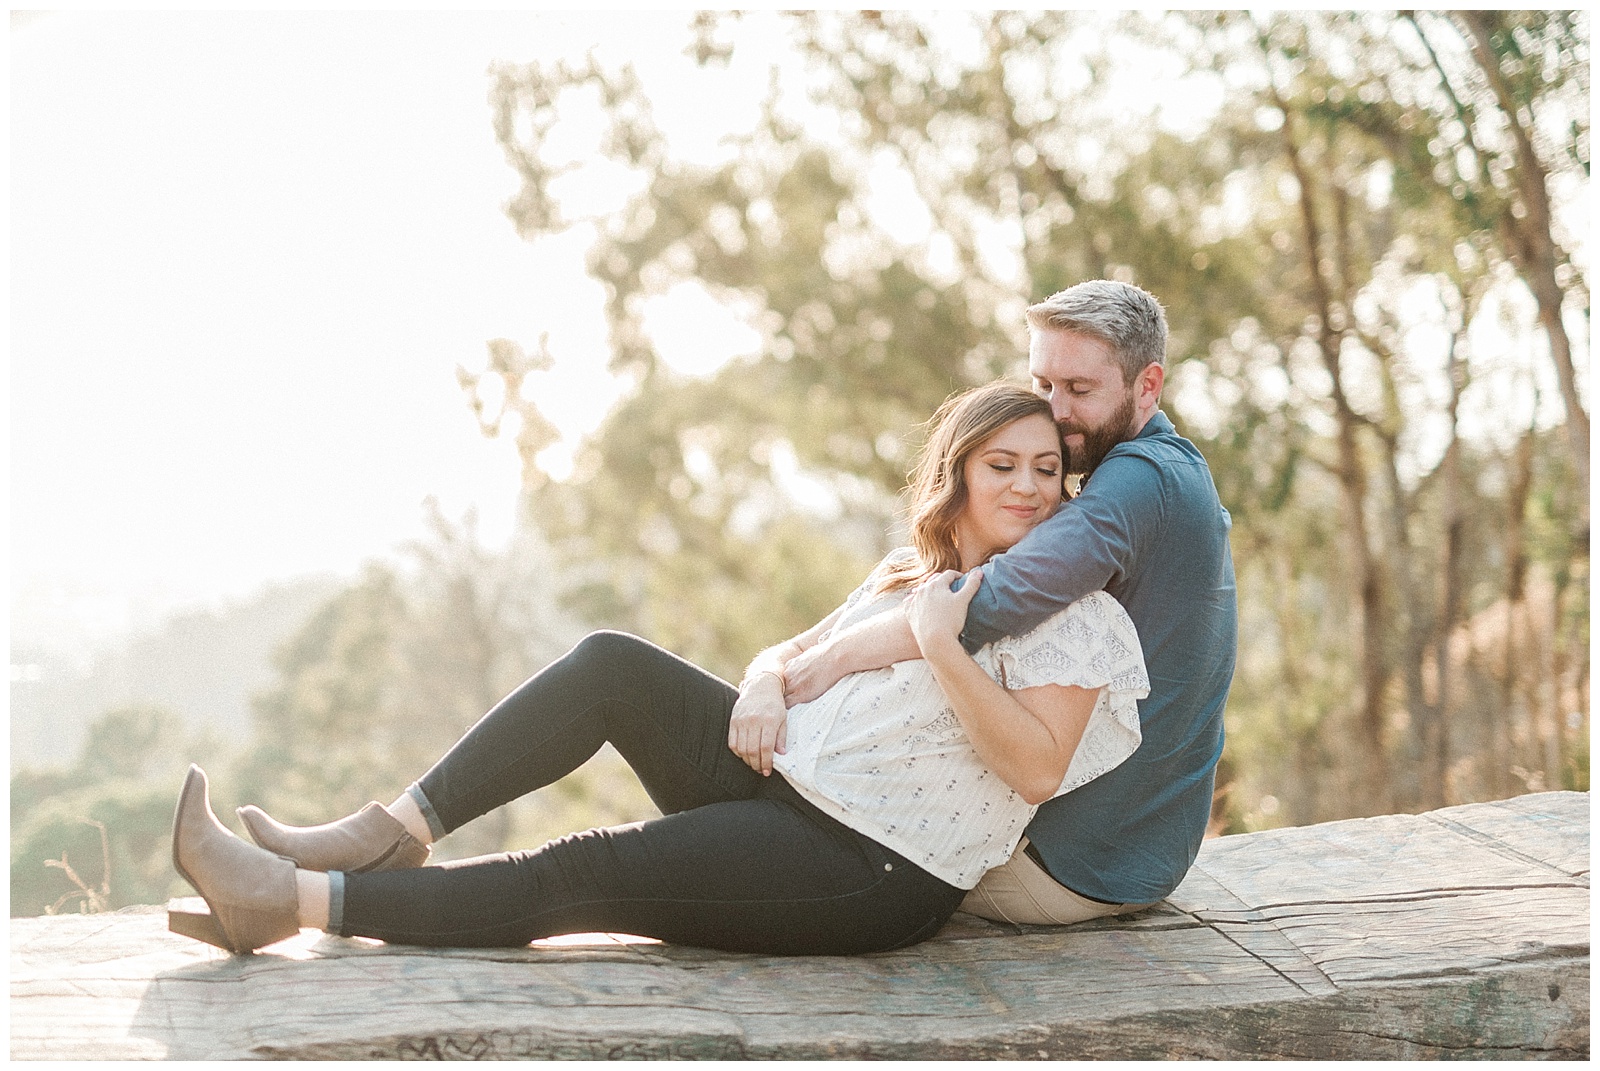 Grizzly Peak Engagement Photos